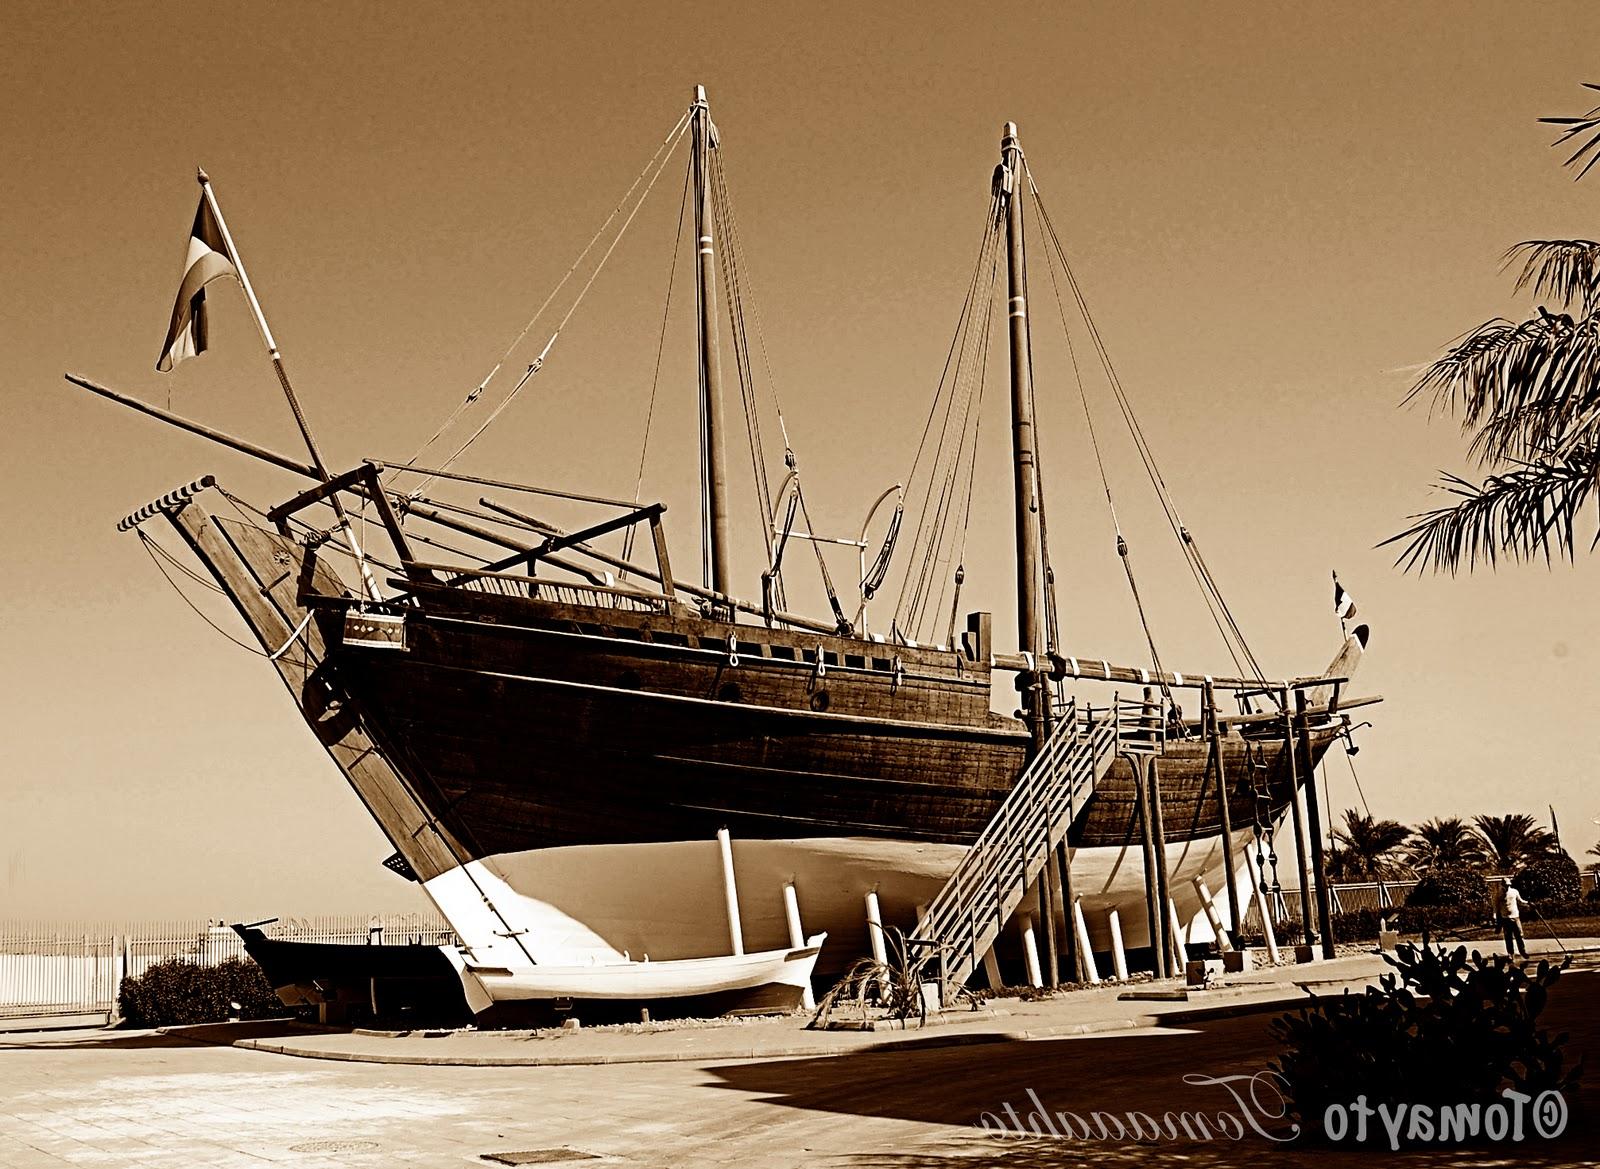 A Dhow, the traditional